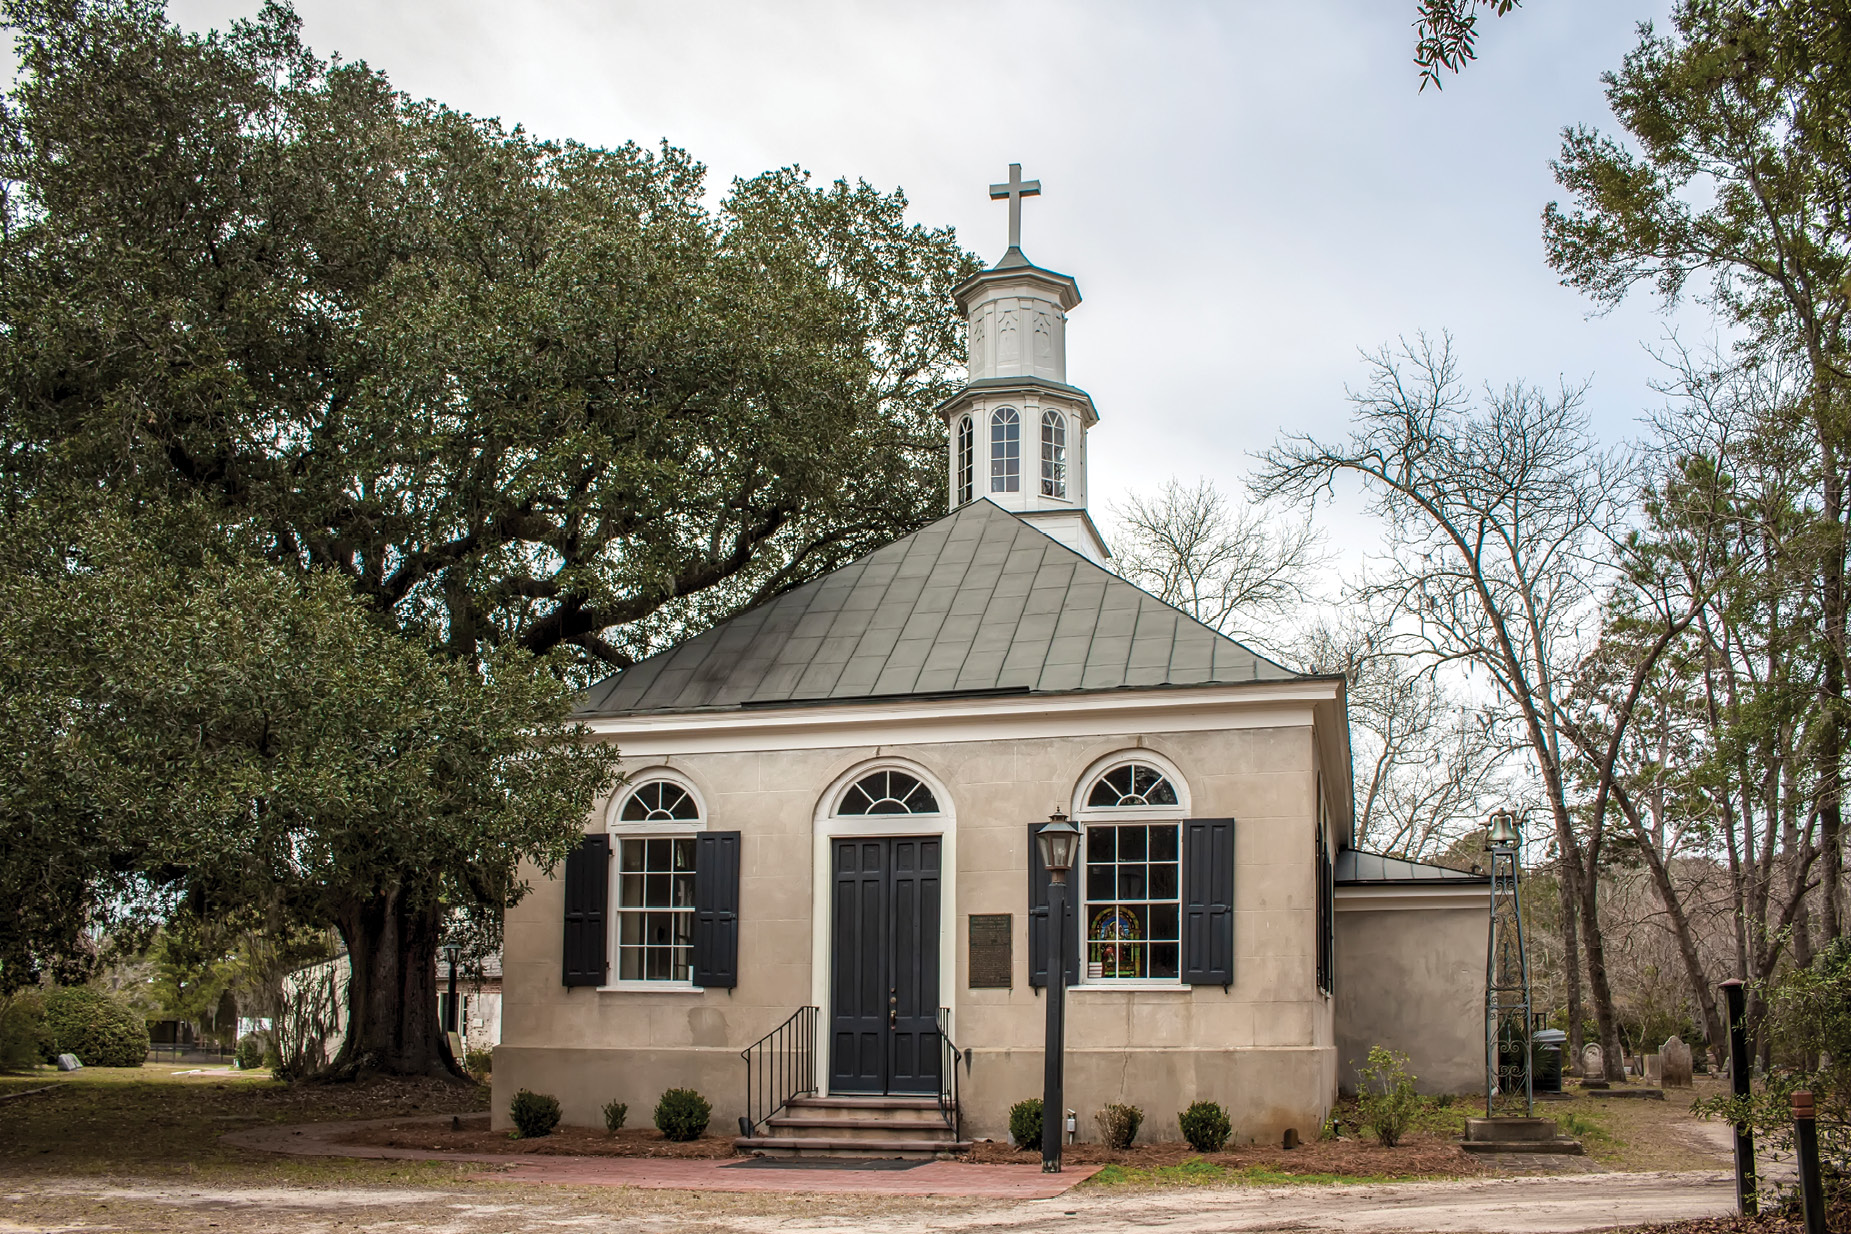 Christ Church near Snee Farm was established as the main house of worship for the parish East of the Cooper River.